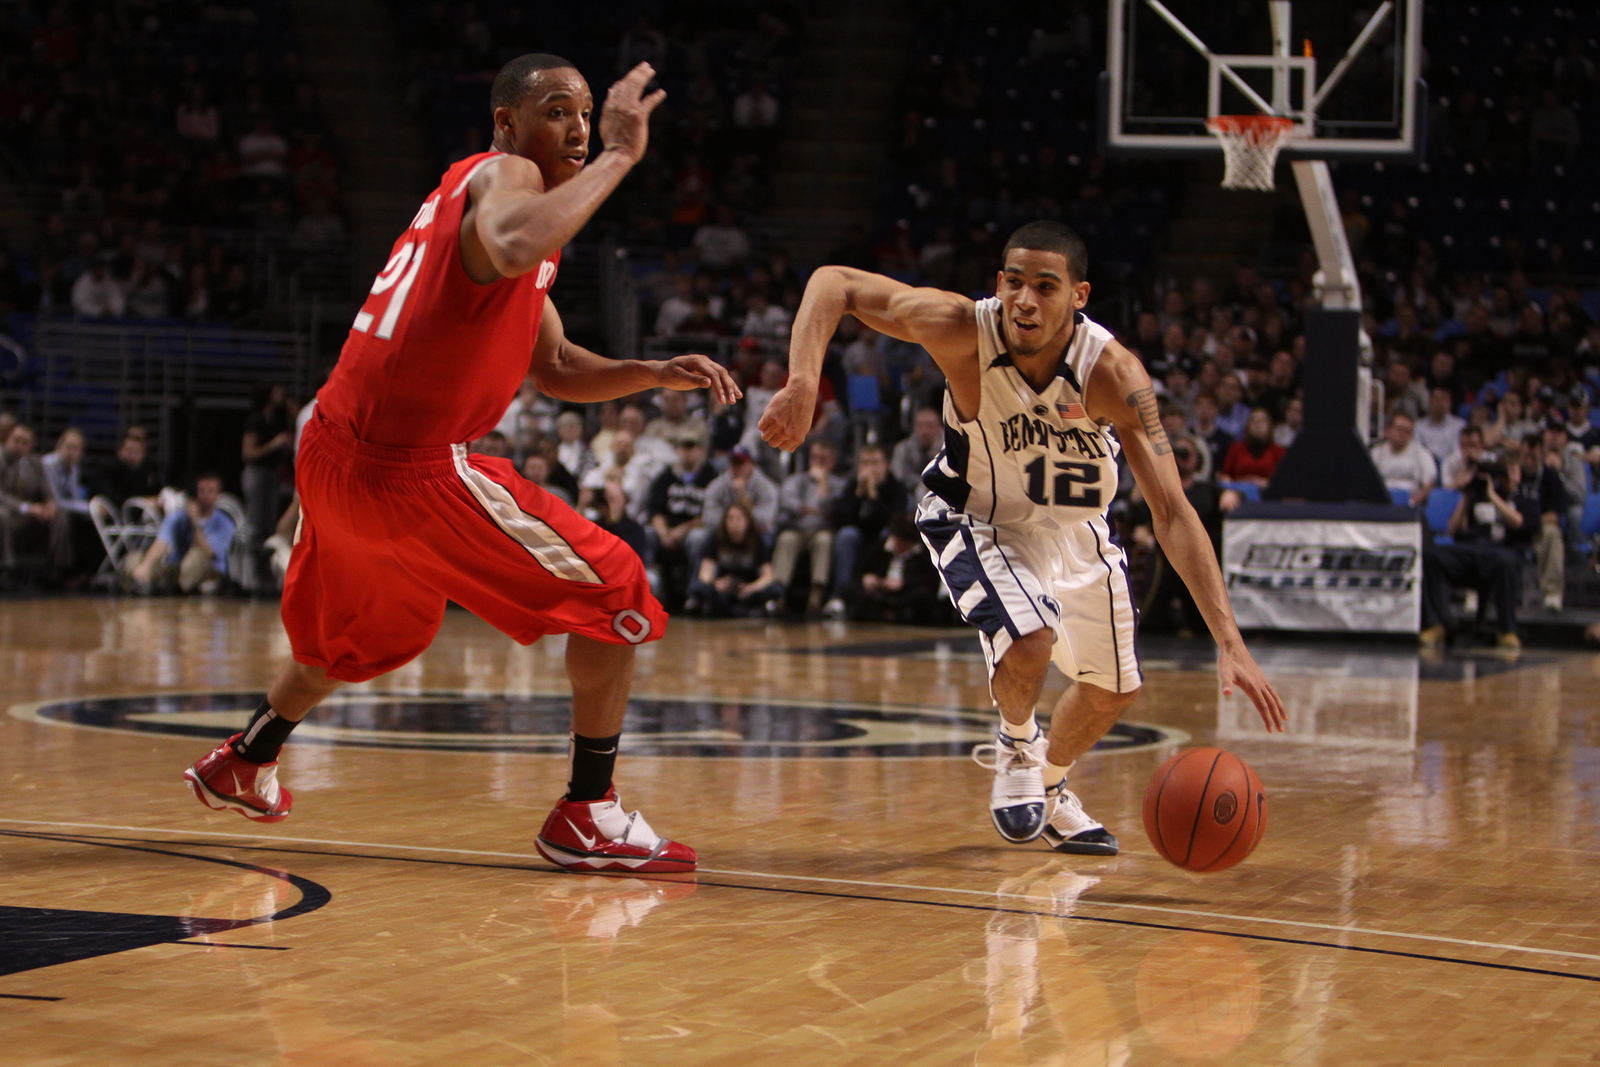 Penn State guard, Talor Battle in a game against Ohio State